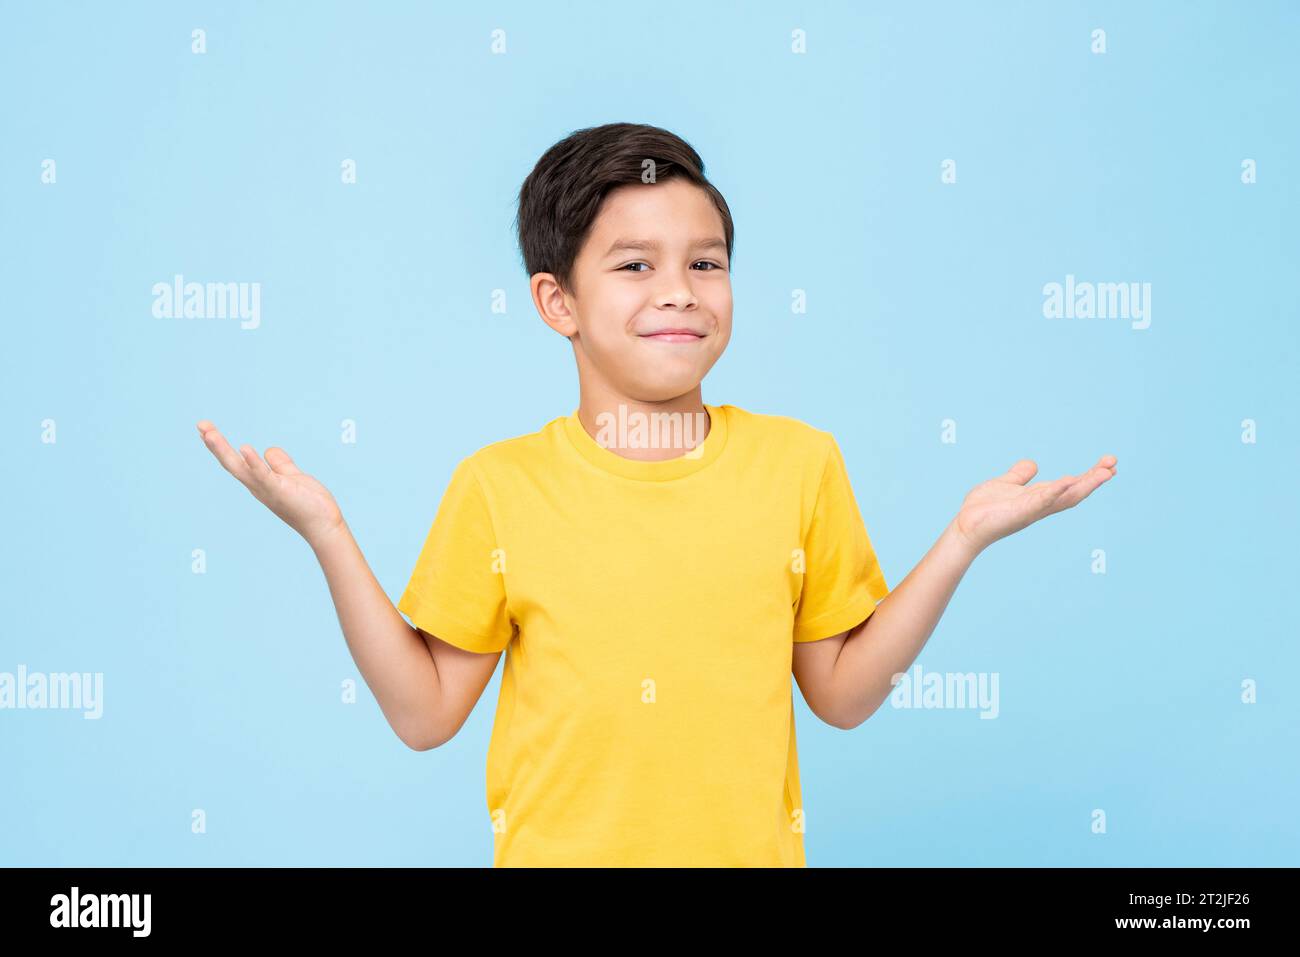 Cute bewildered mixed race boy in yellow t shirt looking at camera with smile and shrugging shoulders against blue background Stock Photo